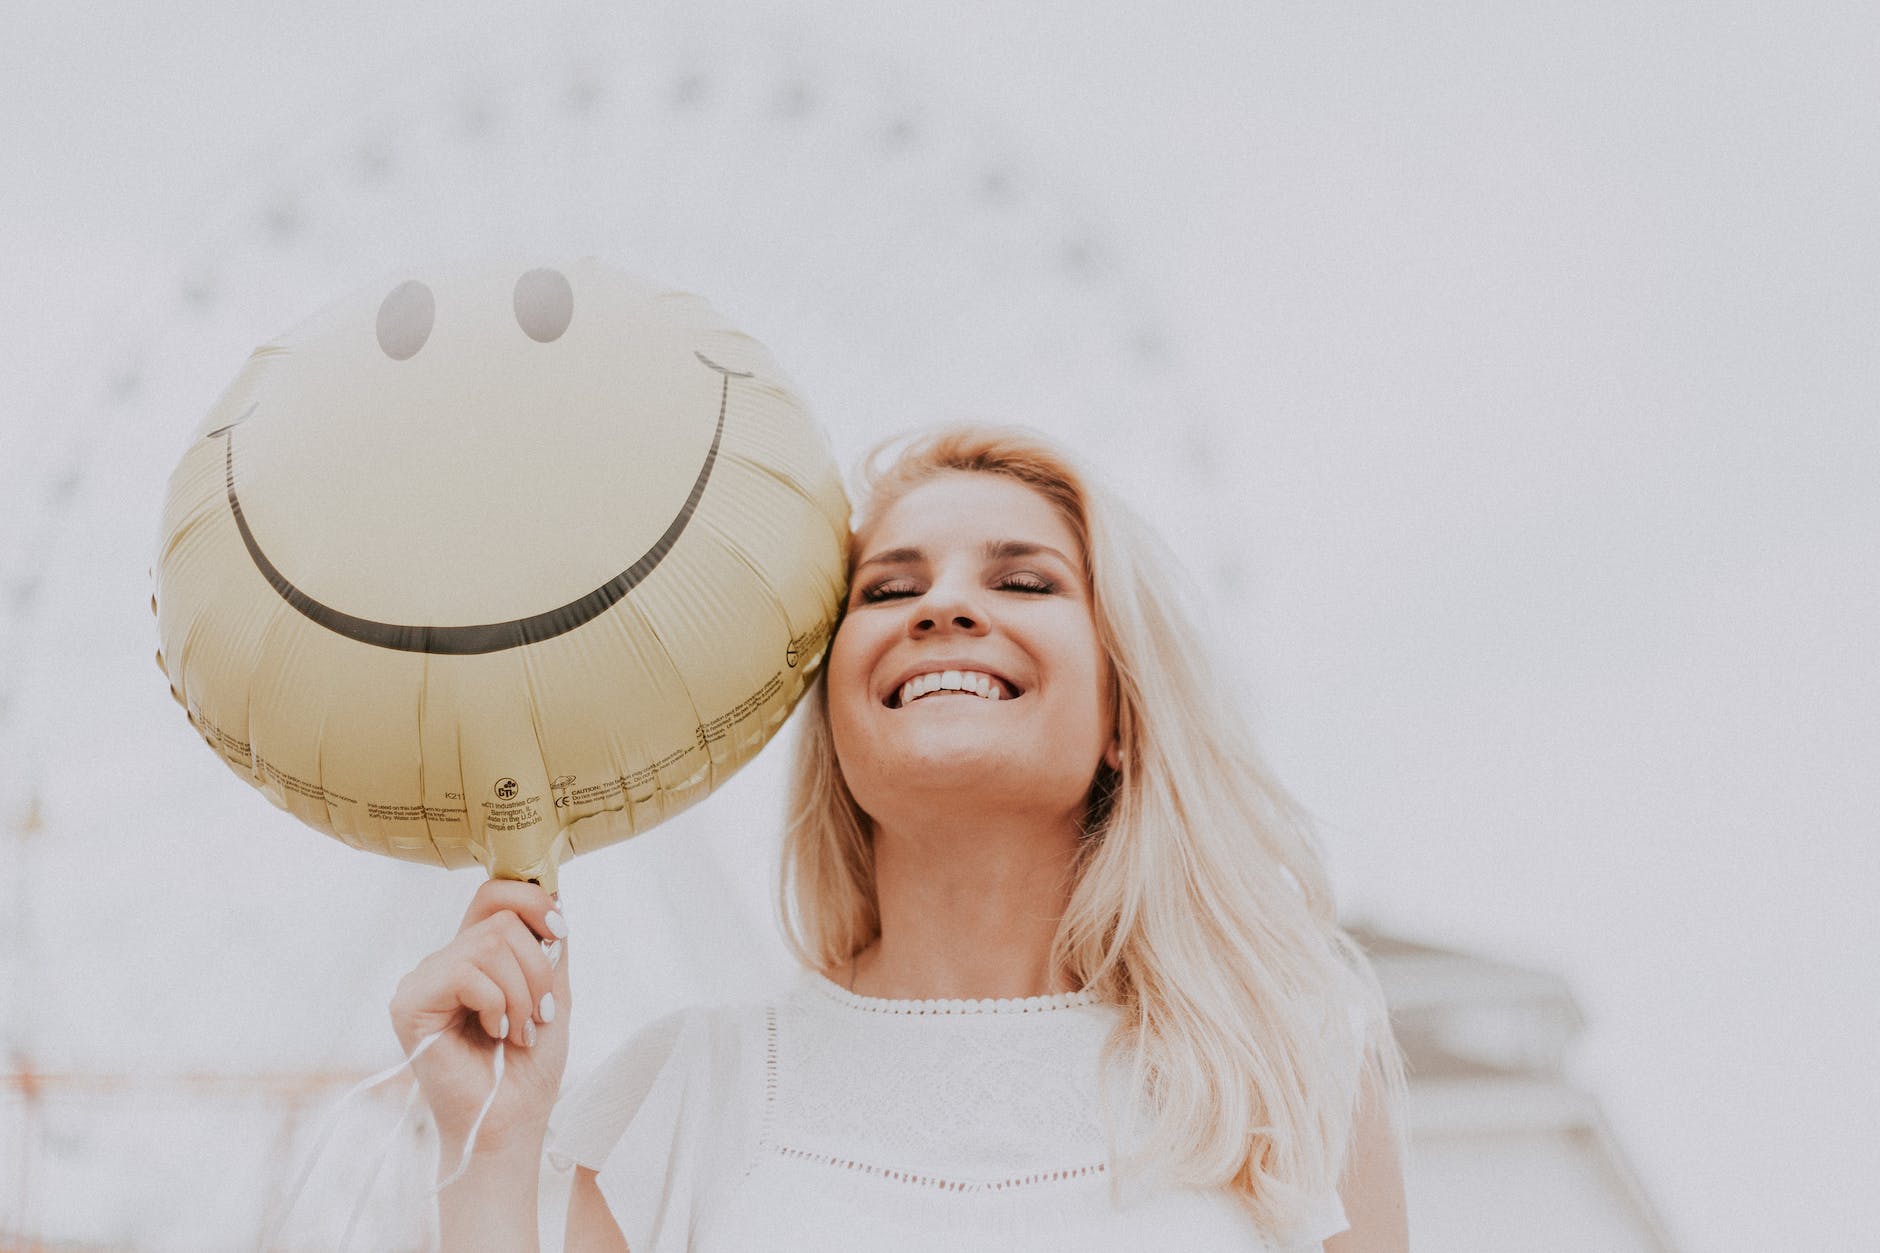 woman holding a smiley balloon and smiling symbolizing the power of positivity